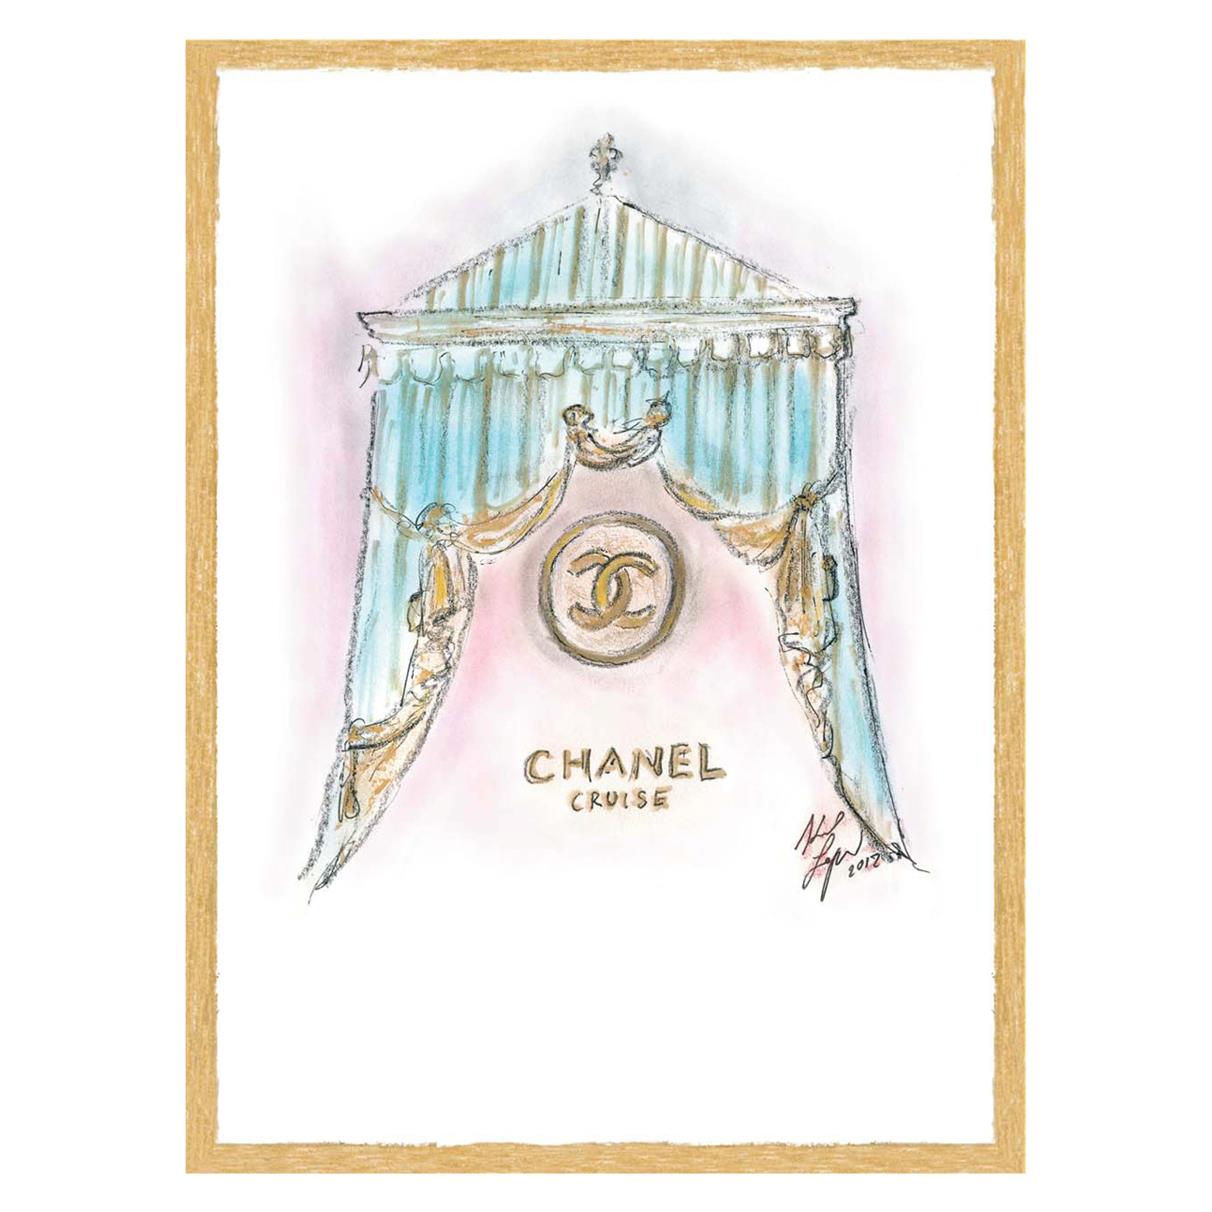 Behind-the-Scenes at the Fashion House in Paris - Page 302 - CHANEL